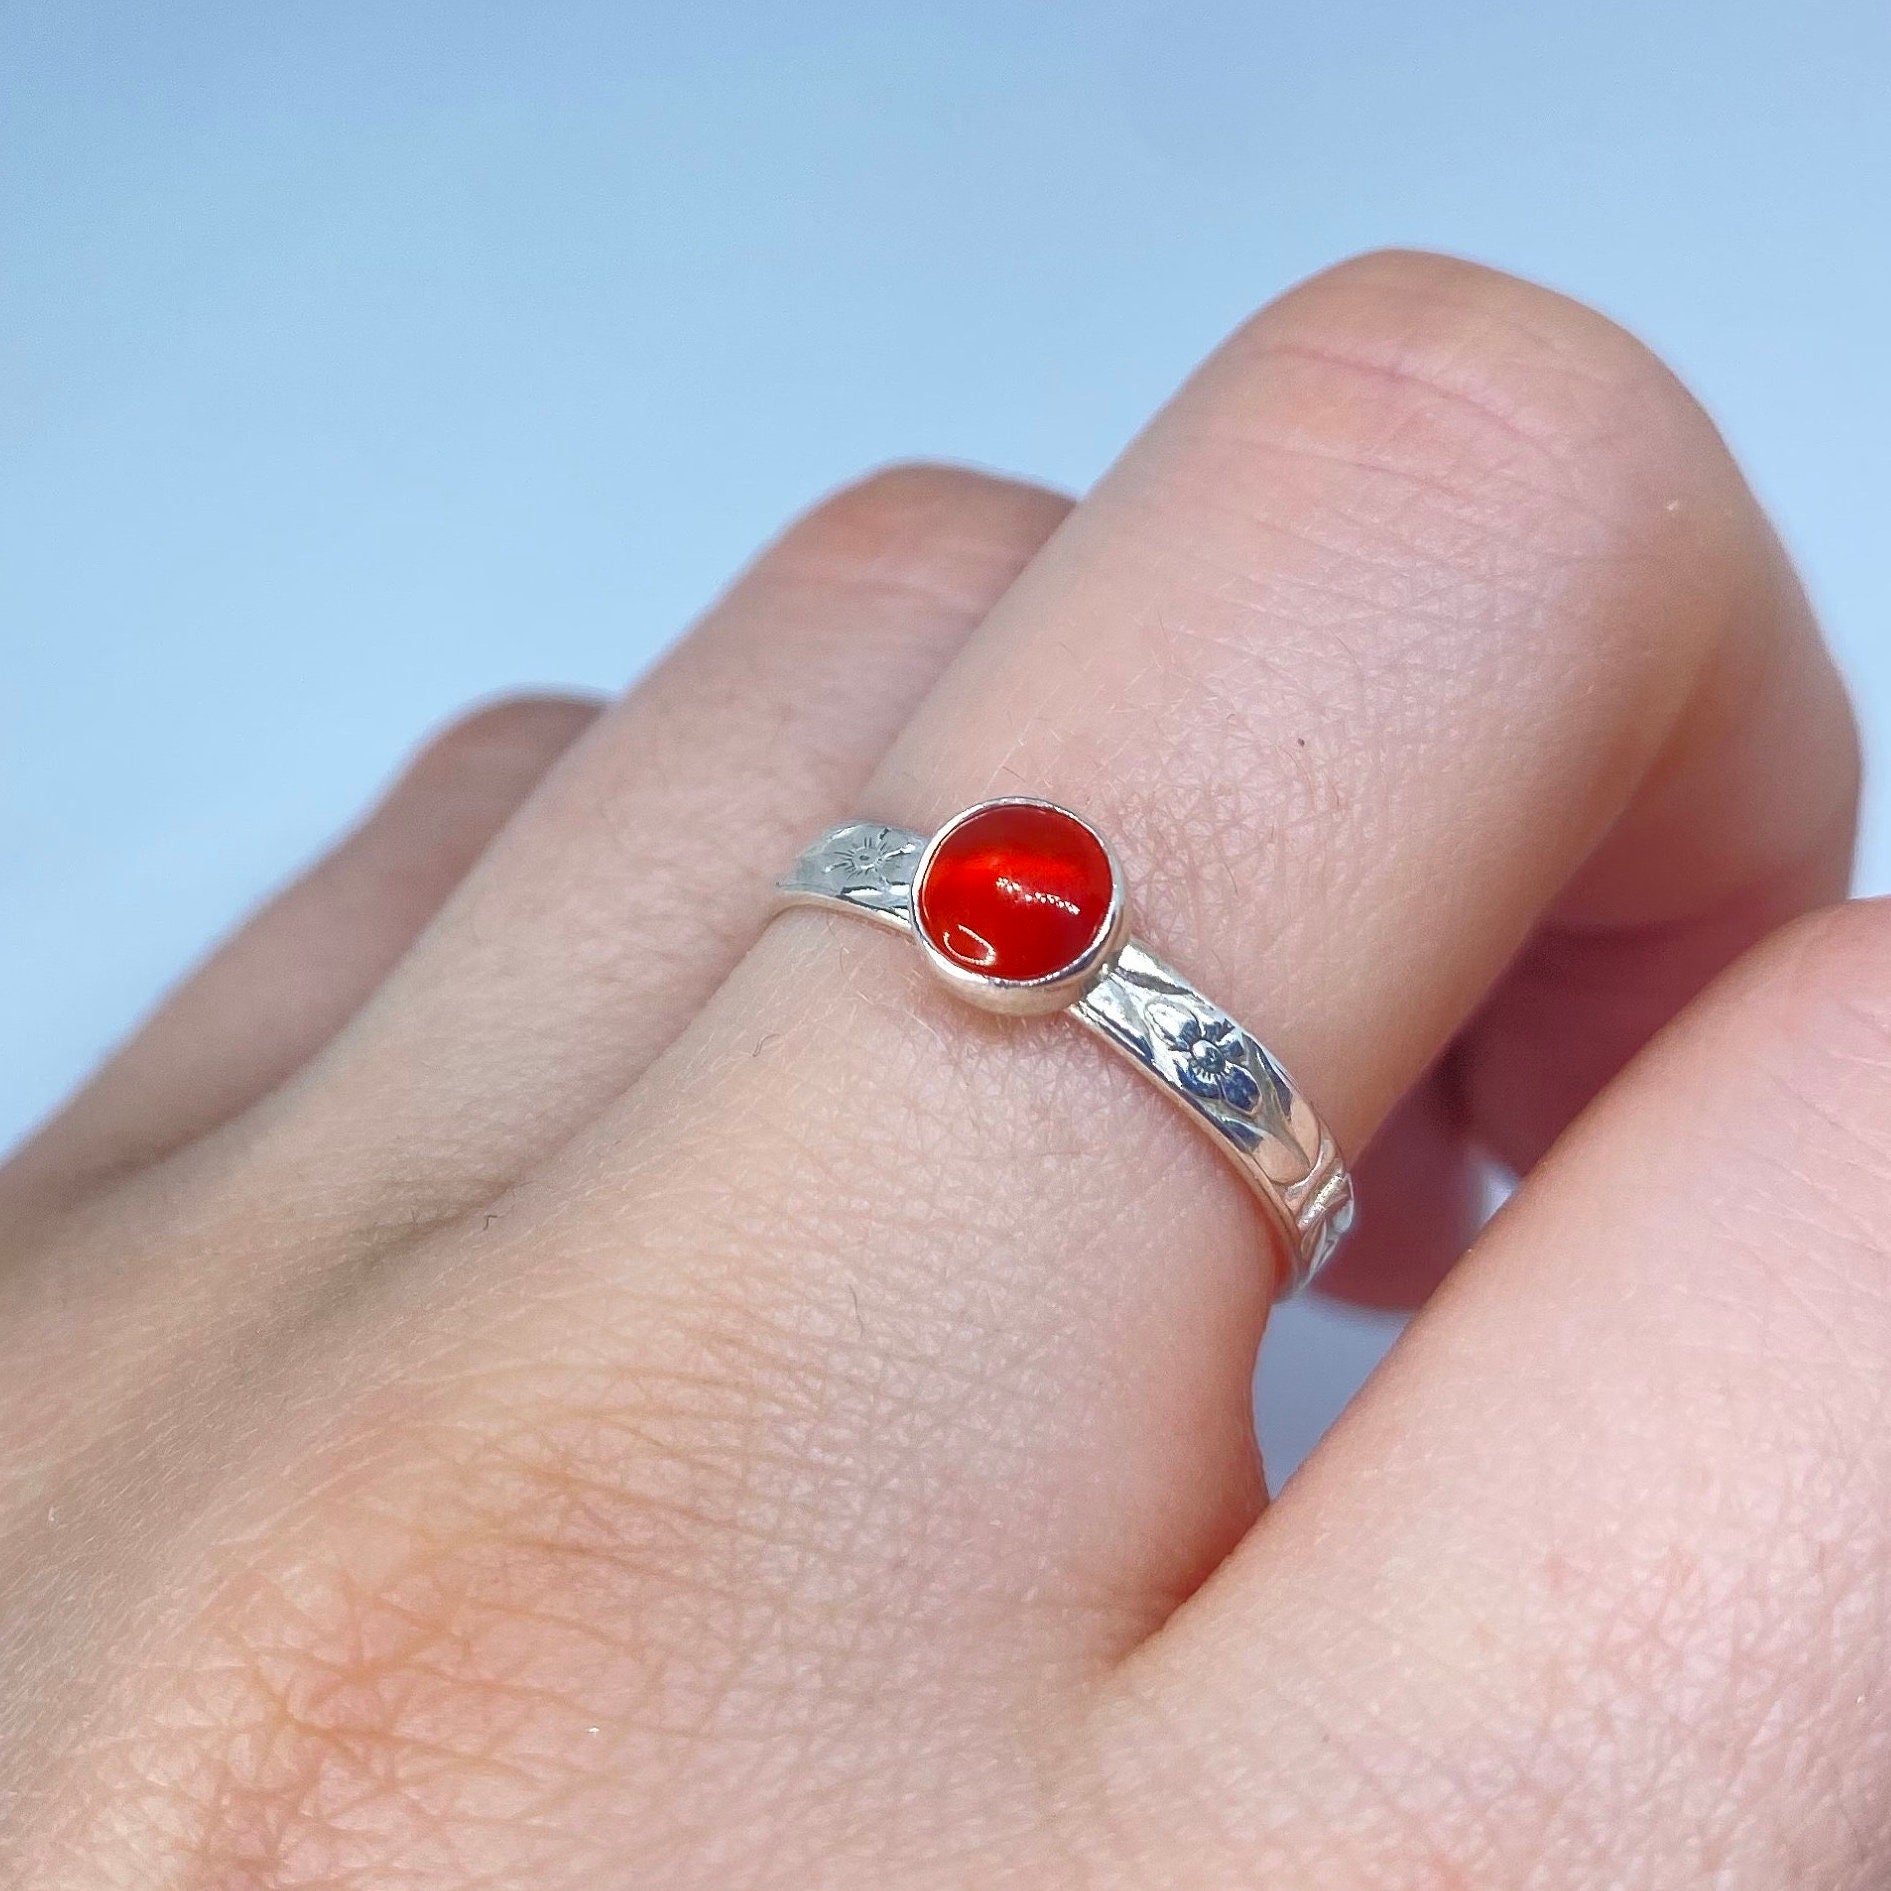 Coral (Moonga) Stone Original Certified Coral (Moonga) Stone Ring Silver  Plated Adjustable Woman Man Ring With